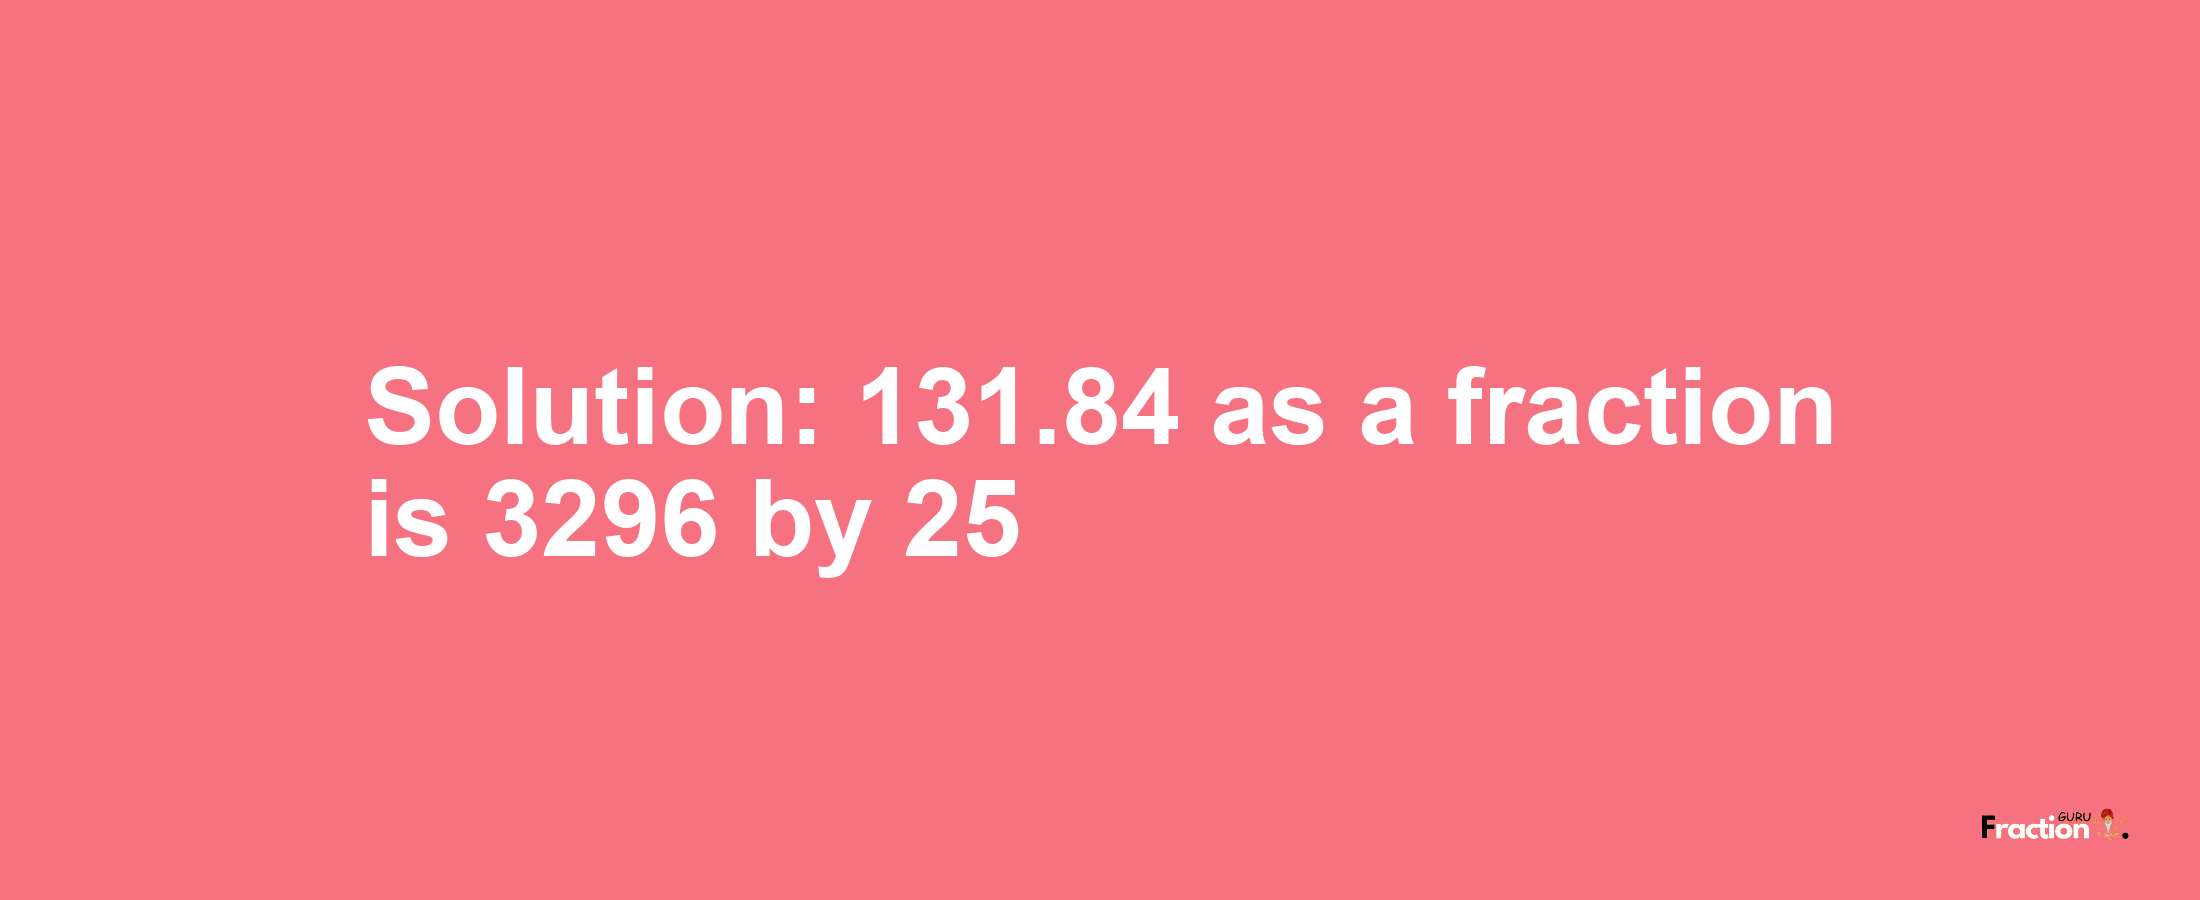 Solution:131.84 as a fraction is 3296/25